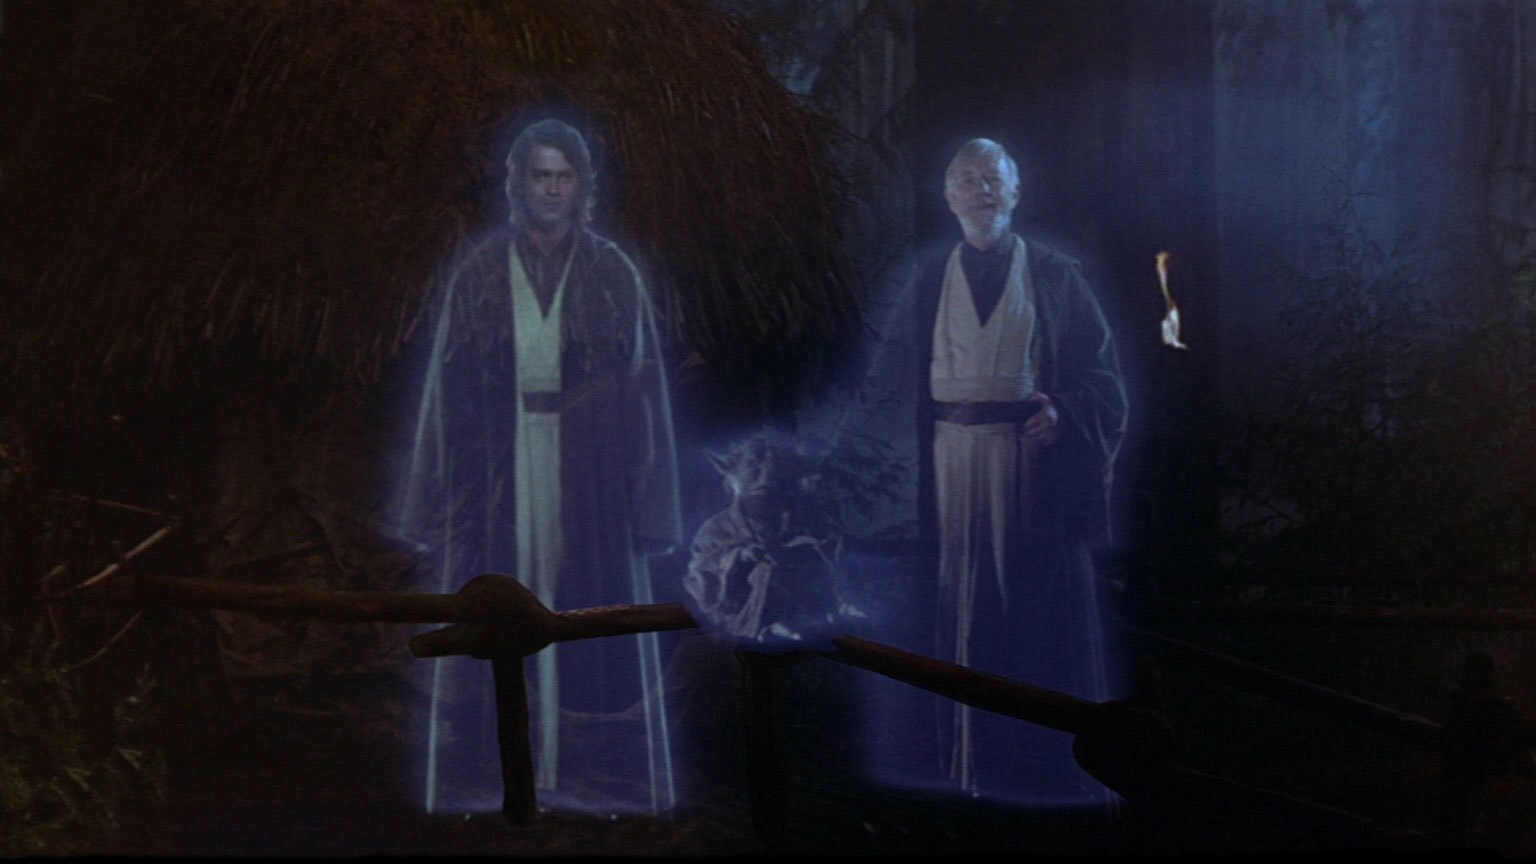 Return of the Jedi force ghosts